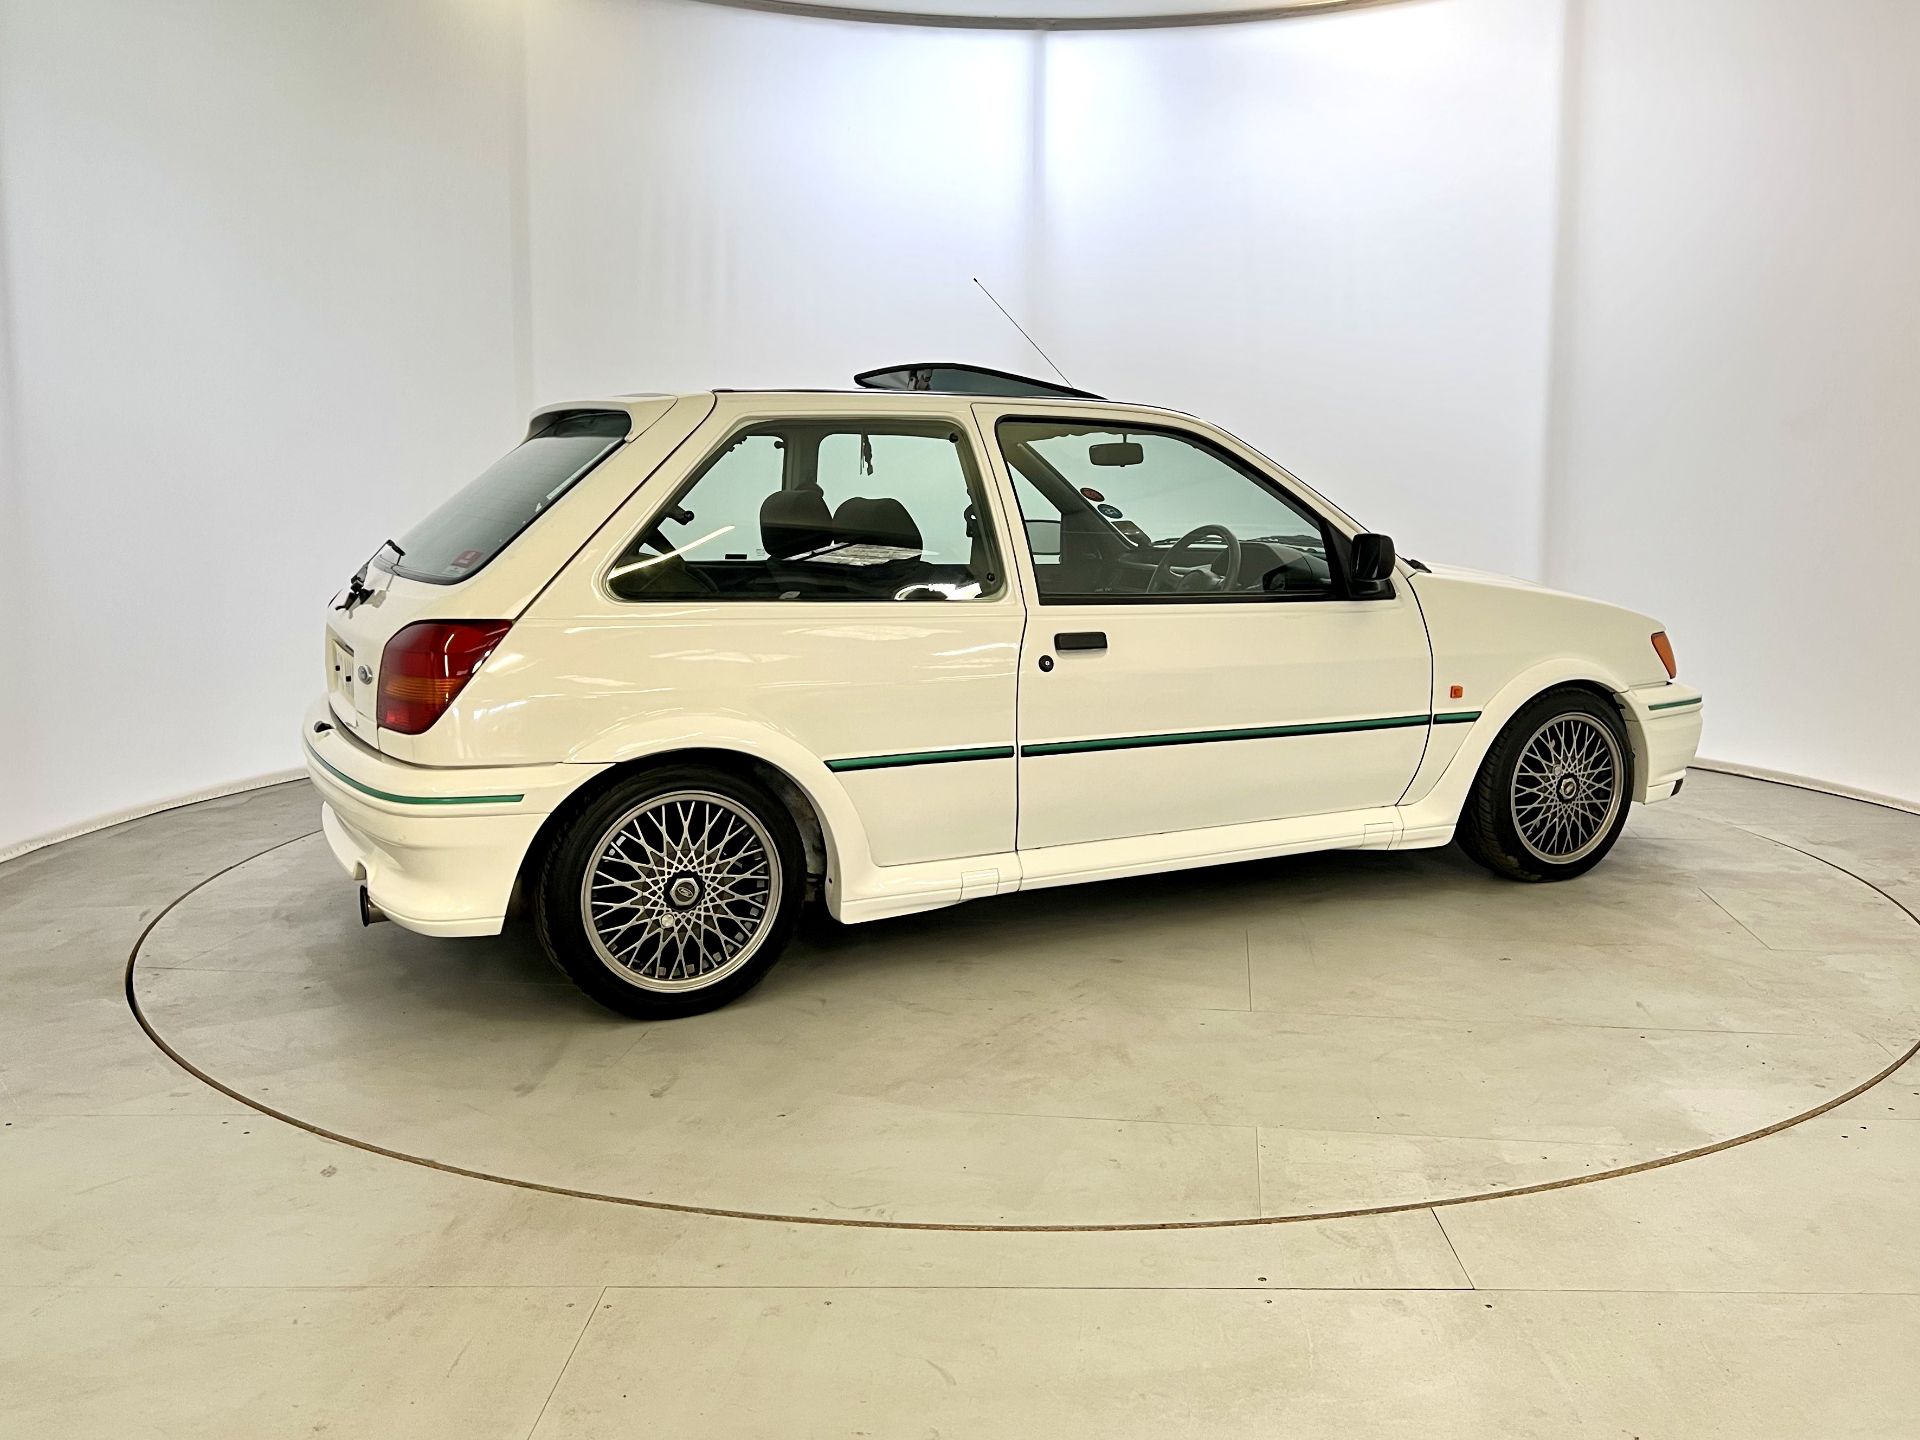 Ford Fiesta RS Turbo - Image 10 of 26